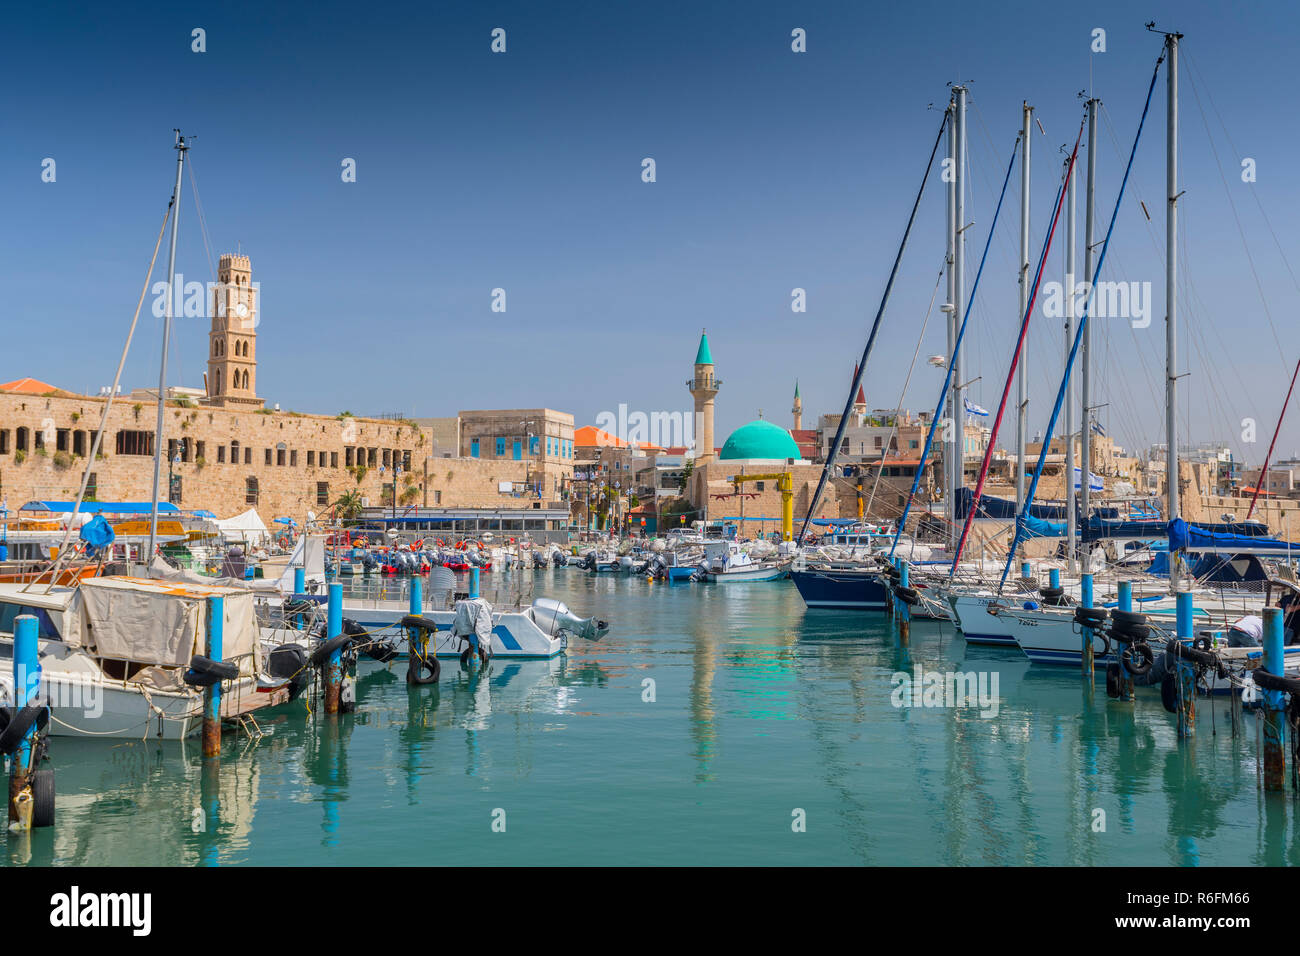 The Ancient Harbour And A Fishing Port In Acre (Akko), Western Galilee, Israel Stock Photo